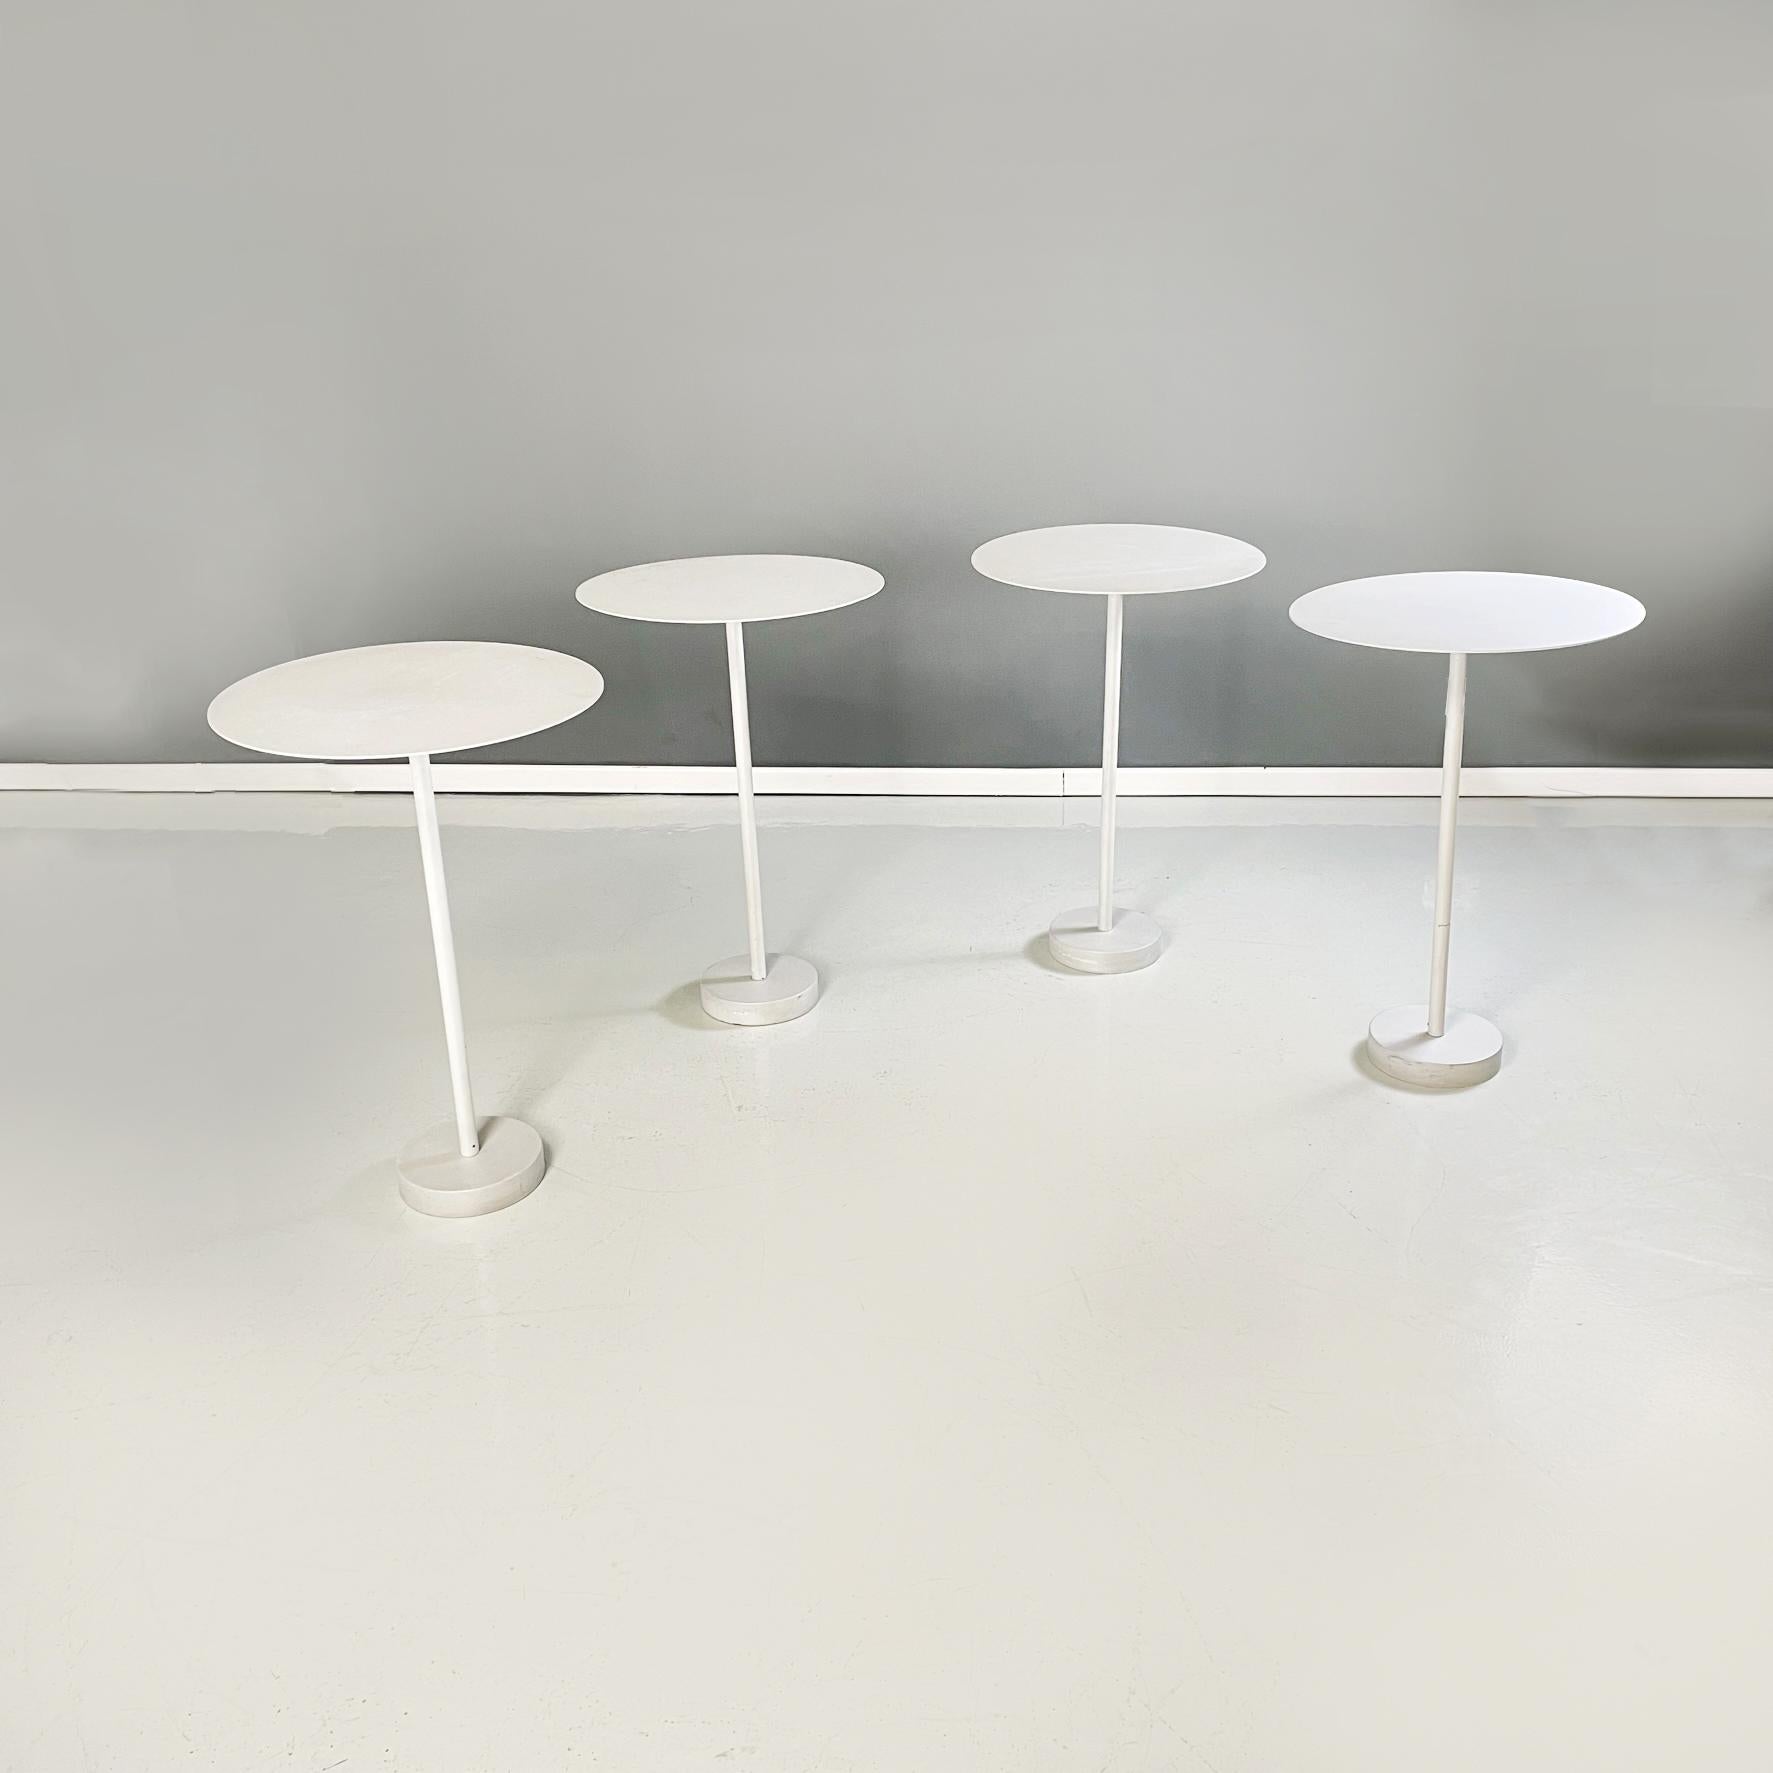 Italian modern Coffee tables mod. Bincan Tables by Naoto Fukasawa for Danese Milano, 2000s
Set of 4 fantastic round coffee tables mod. Bincan Tables in white painted metal. The central structure is in tubular metal and ends with the cylindrical